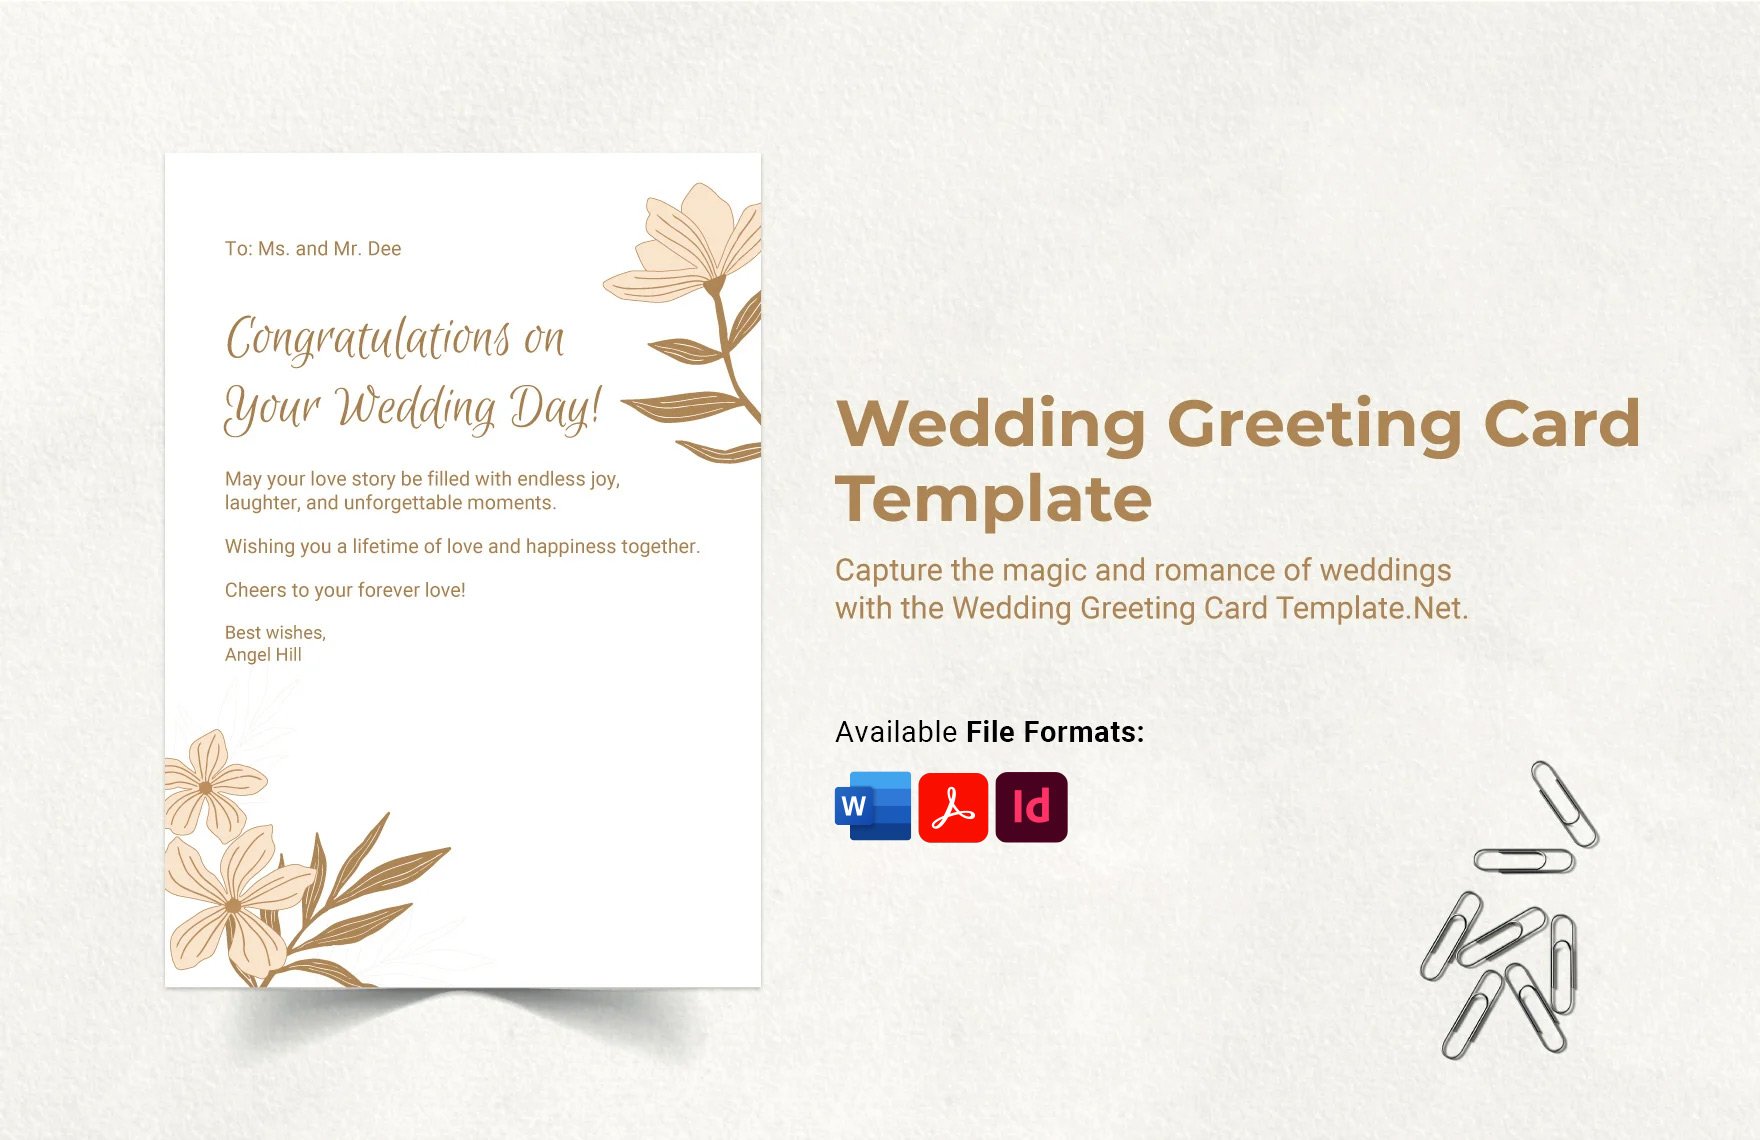 Wedding Greeting Card Template in Word, PDF, InDesign